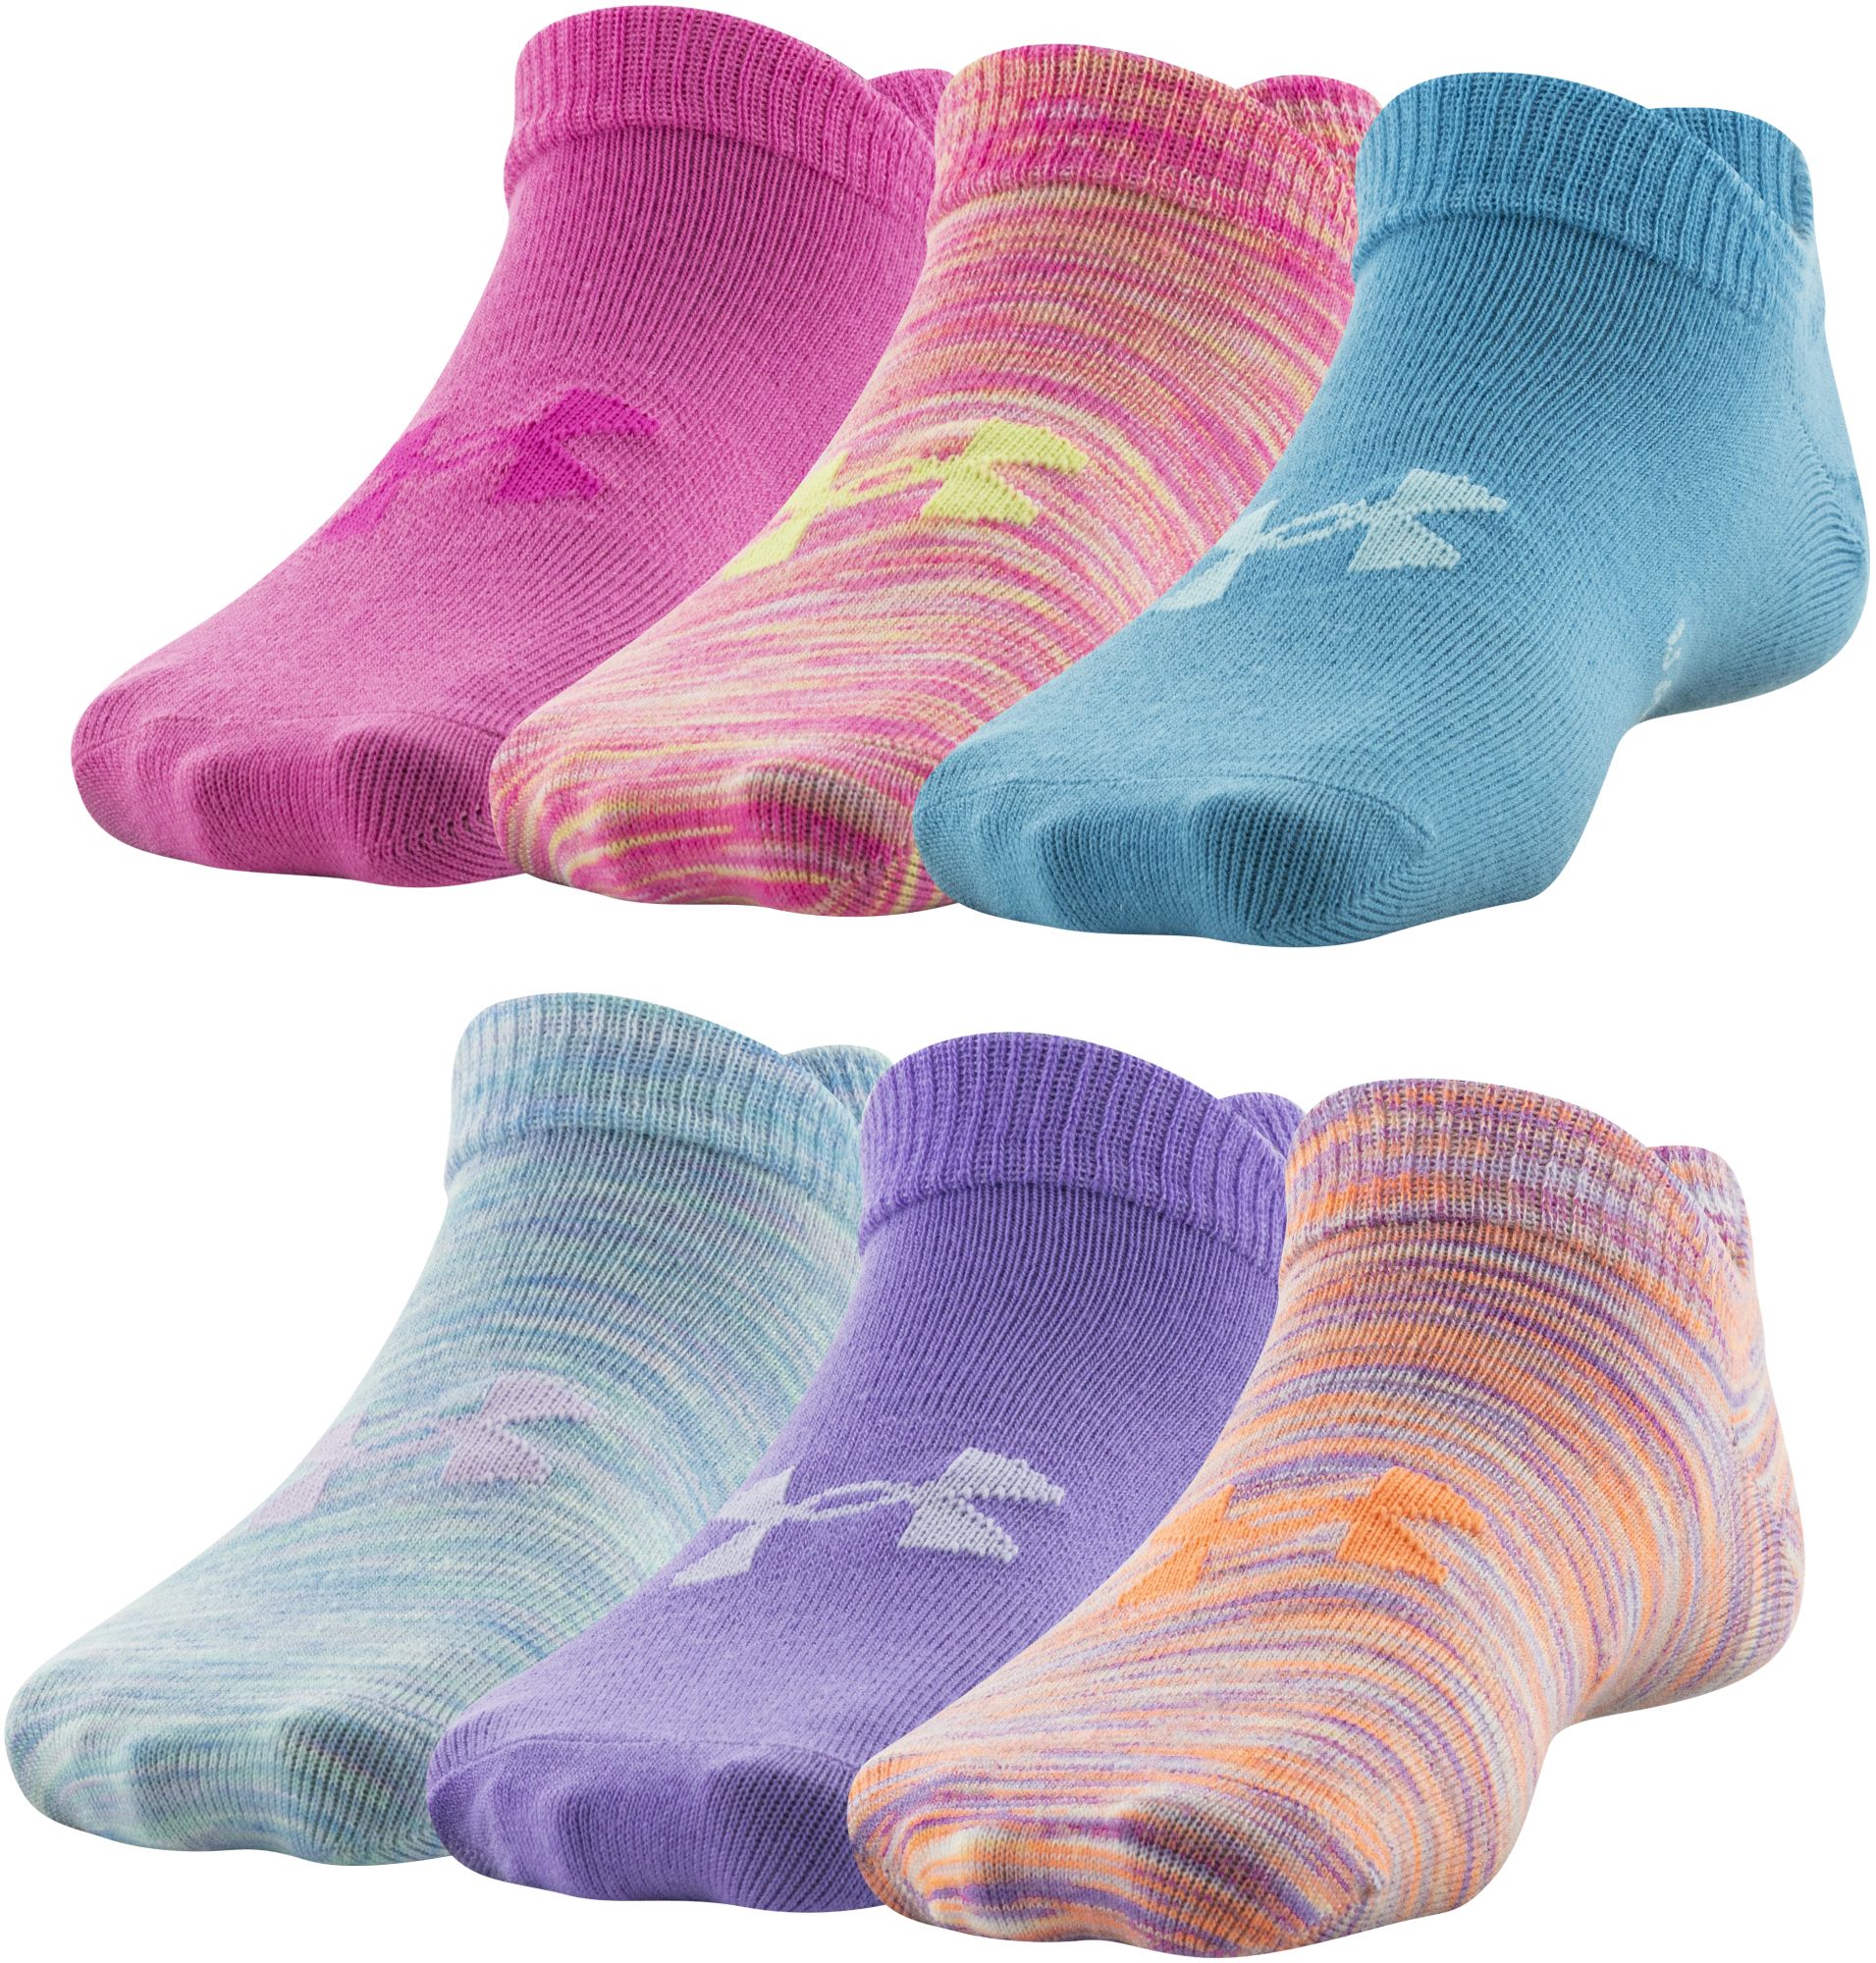 UNDER ARMOUR GIRL'S ESSENTIAL SOCKS - 6 PACK INTERNATIONAL SHIPPING